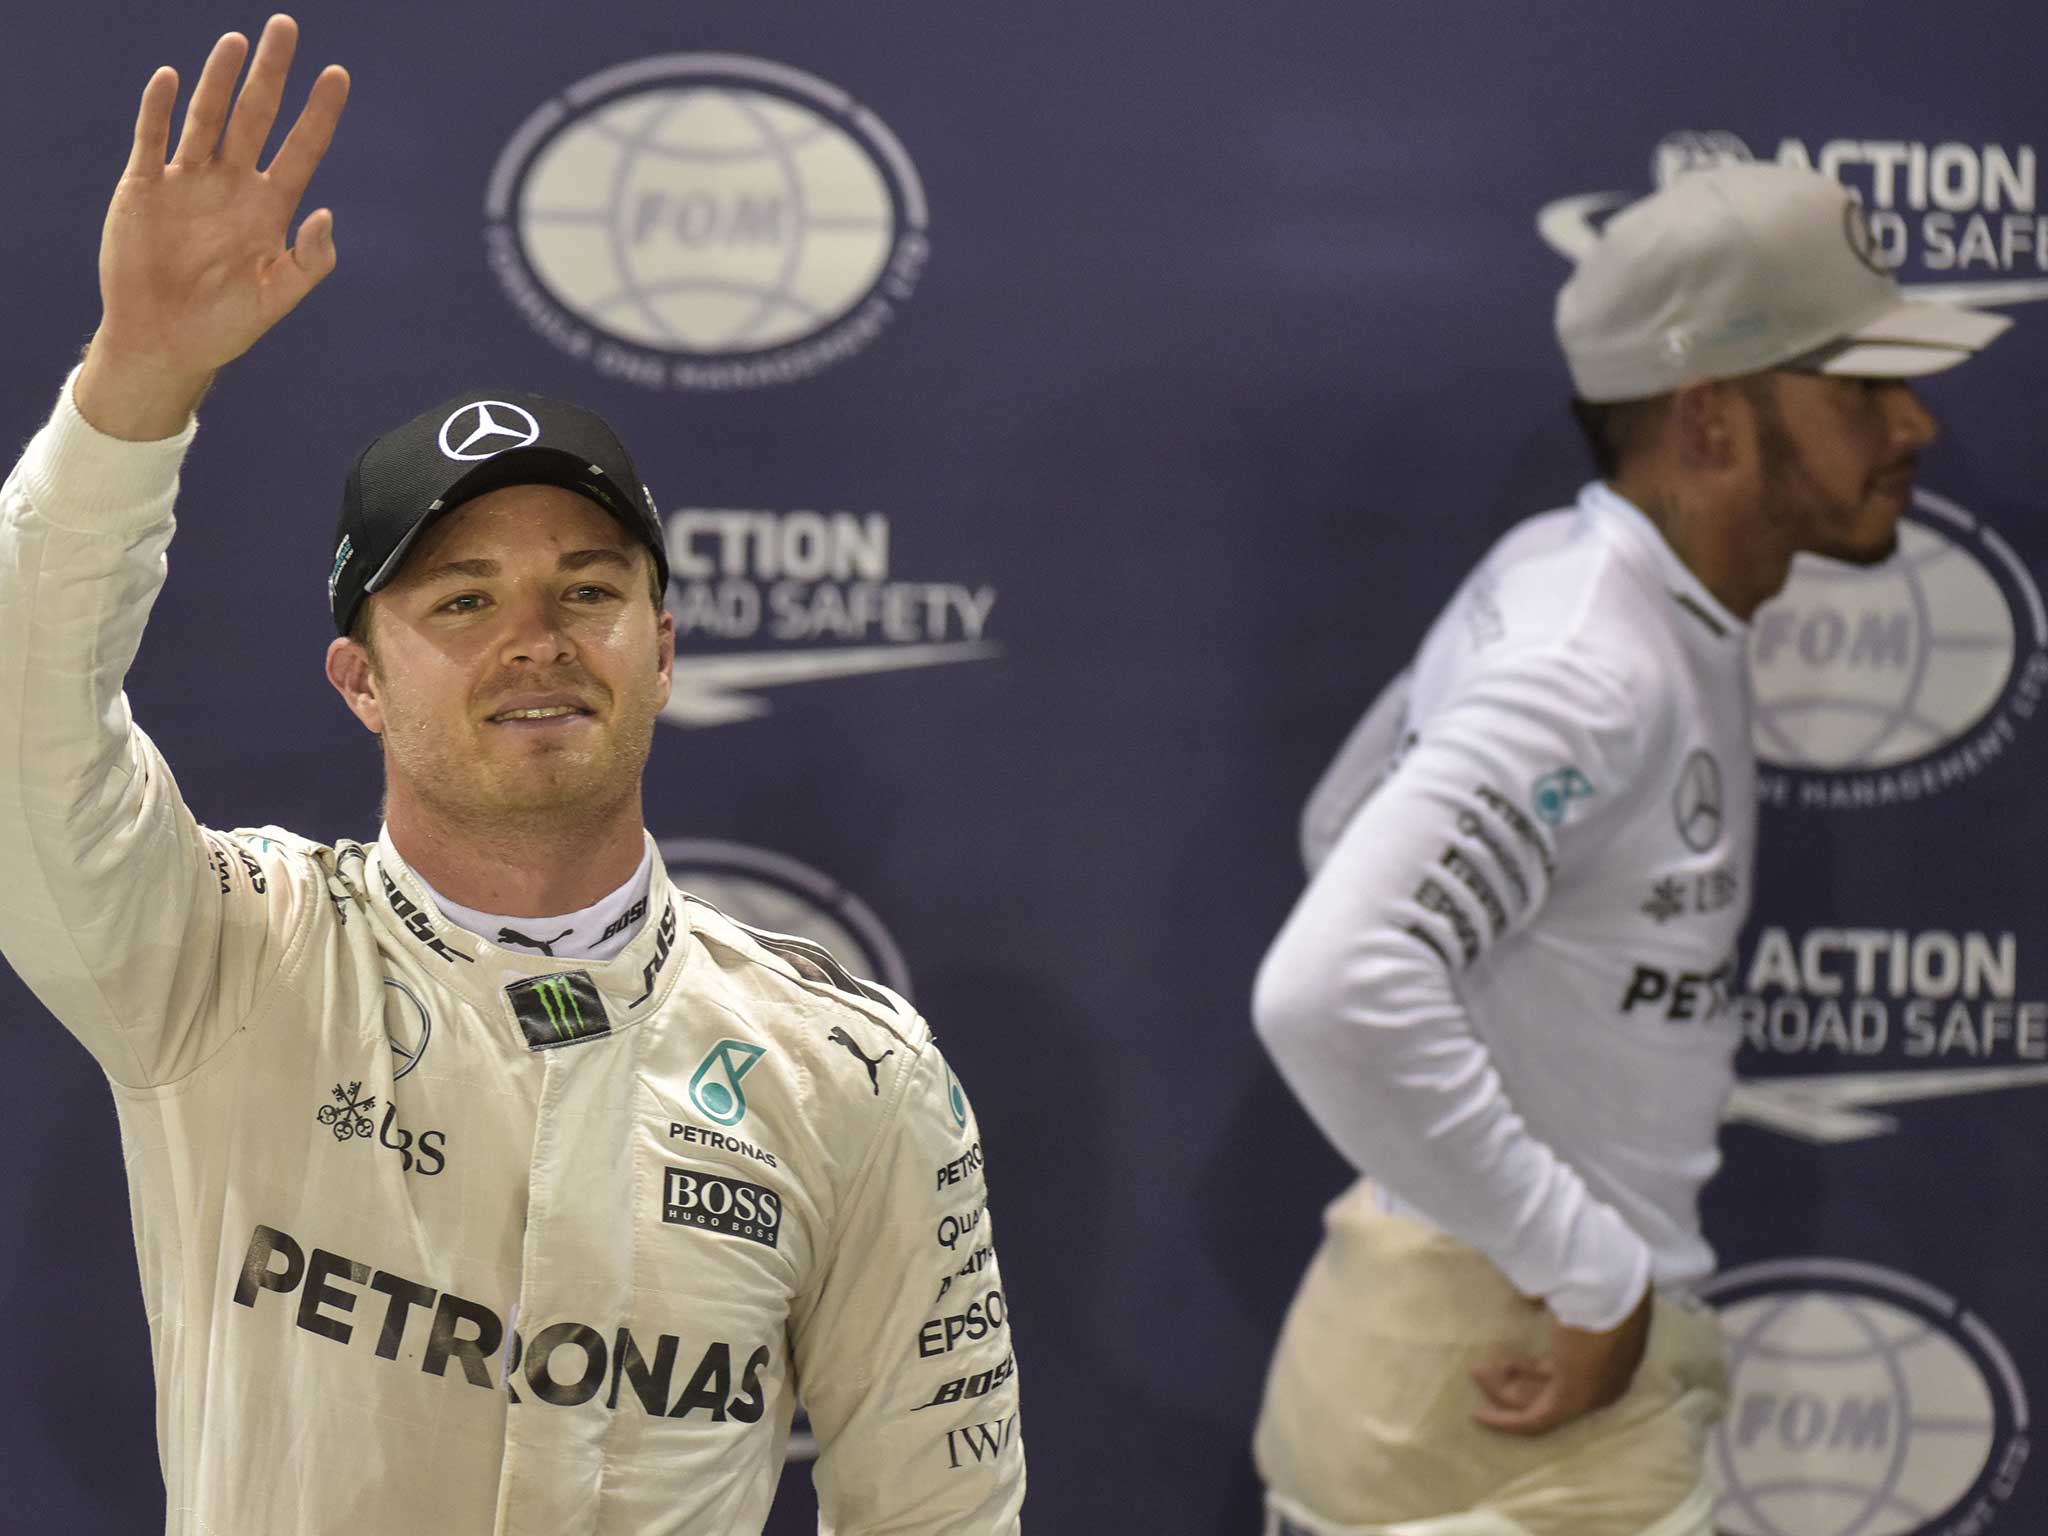 Nico Rosberg continues to be a nuisance for team-mate Lewis Hamilton